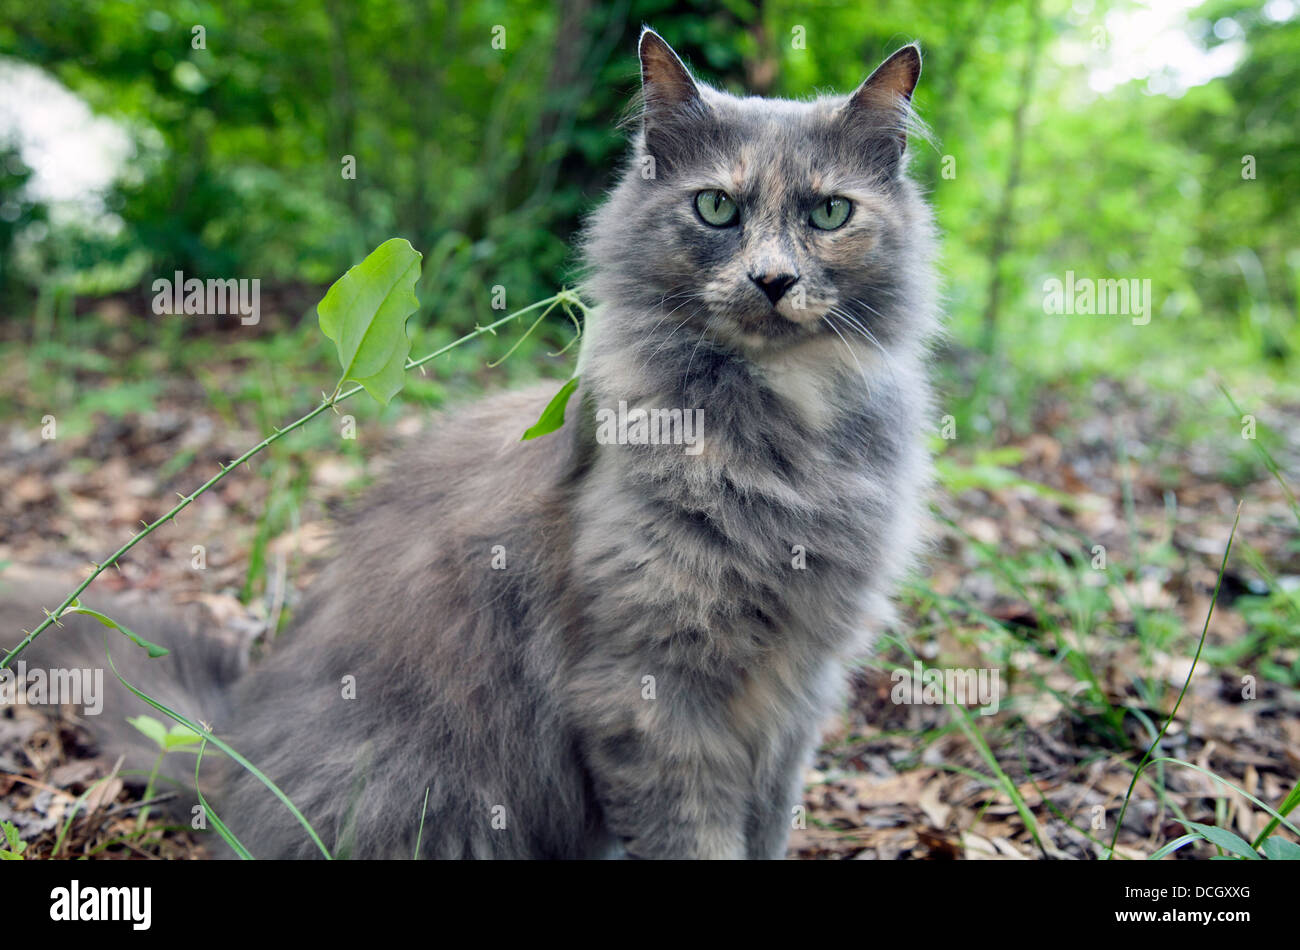 Long haired gray cat in natural background Stock Photo - Alamy